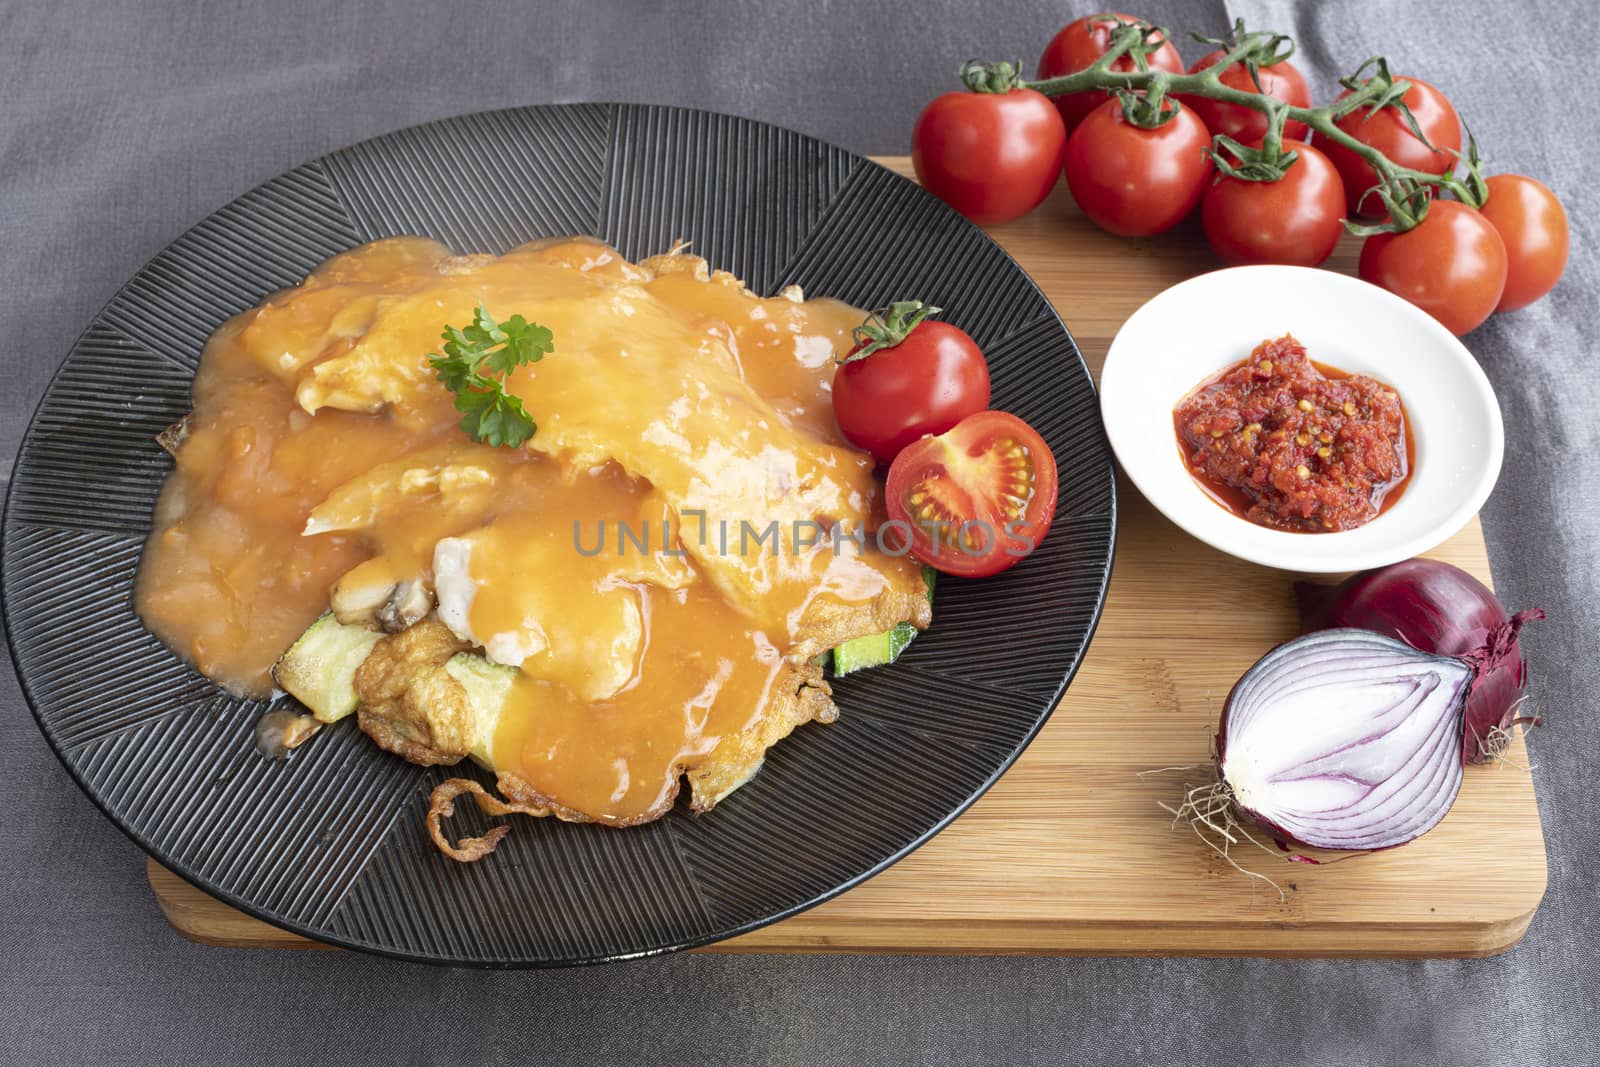 Omelet served with several type of vegetables and tomatoe sauce